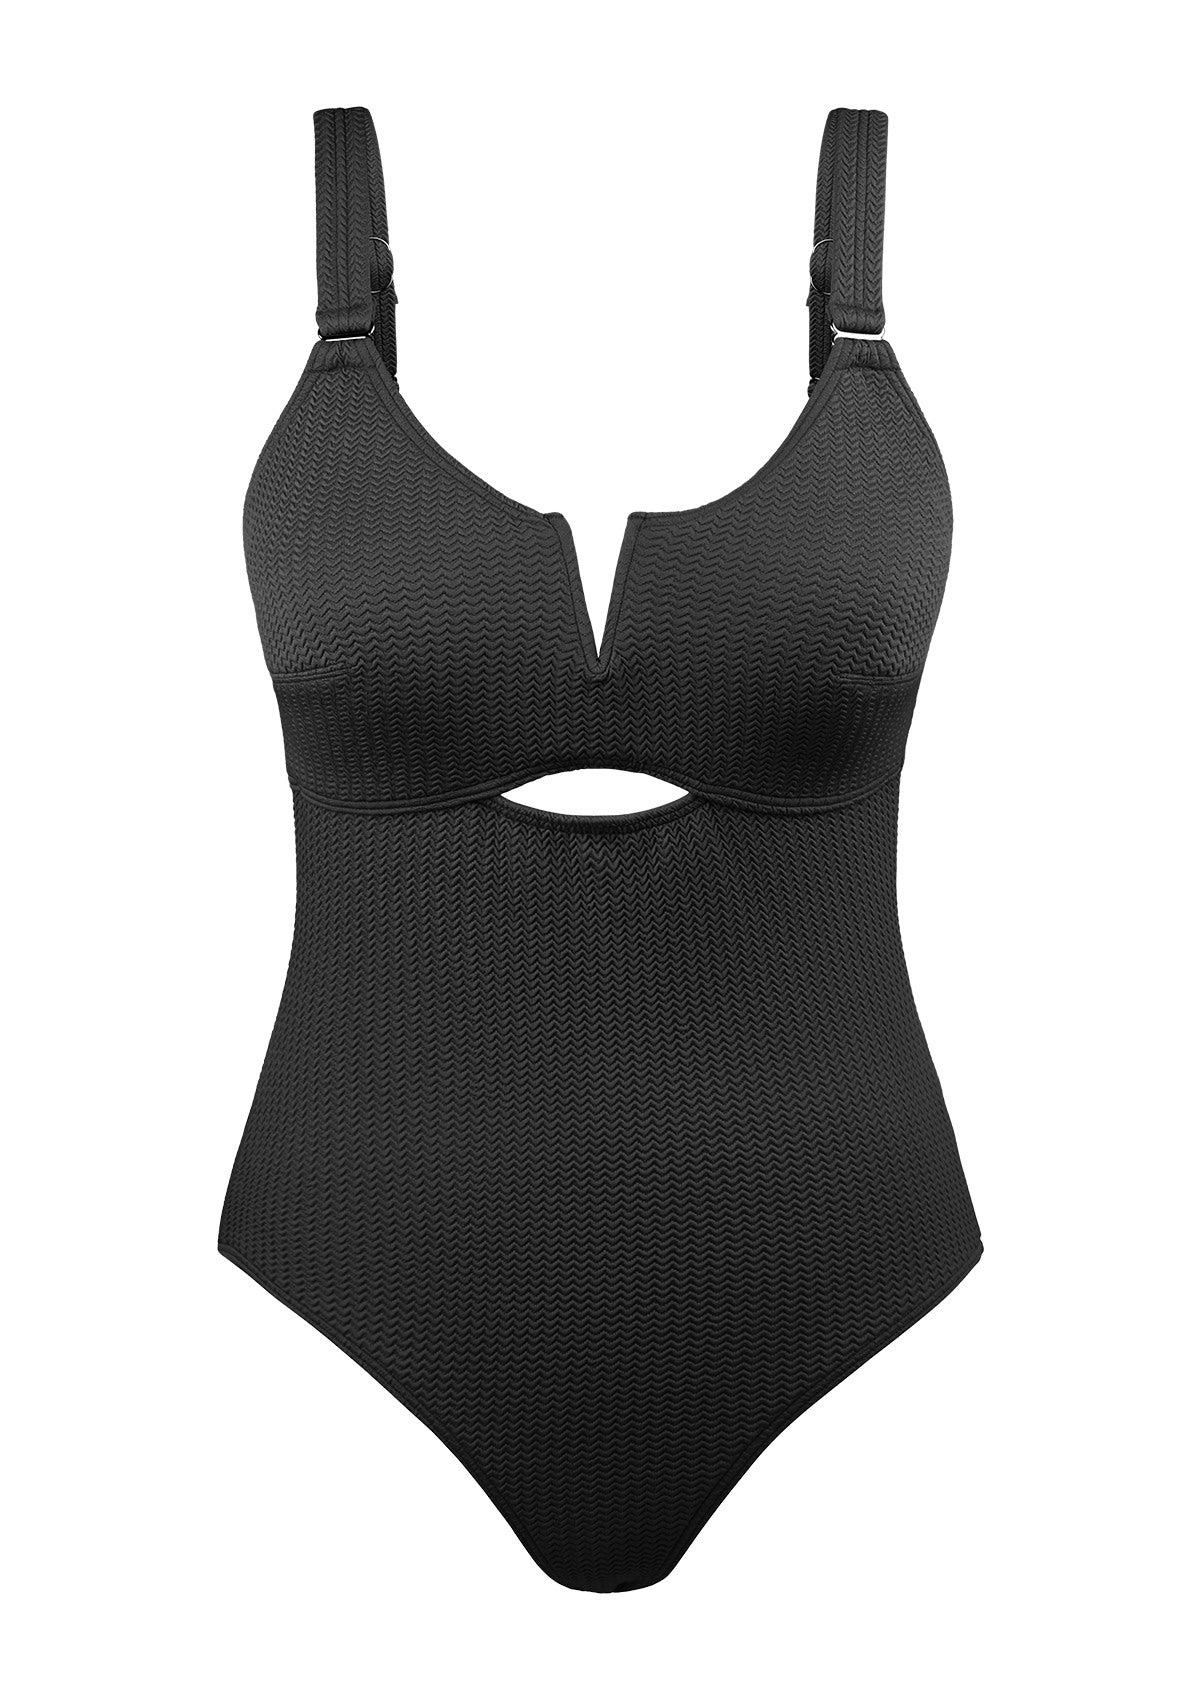 V-wire Plunge Textured One-piece Cutout Swimsuit - 4XL / Black